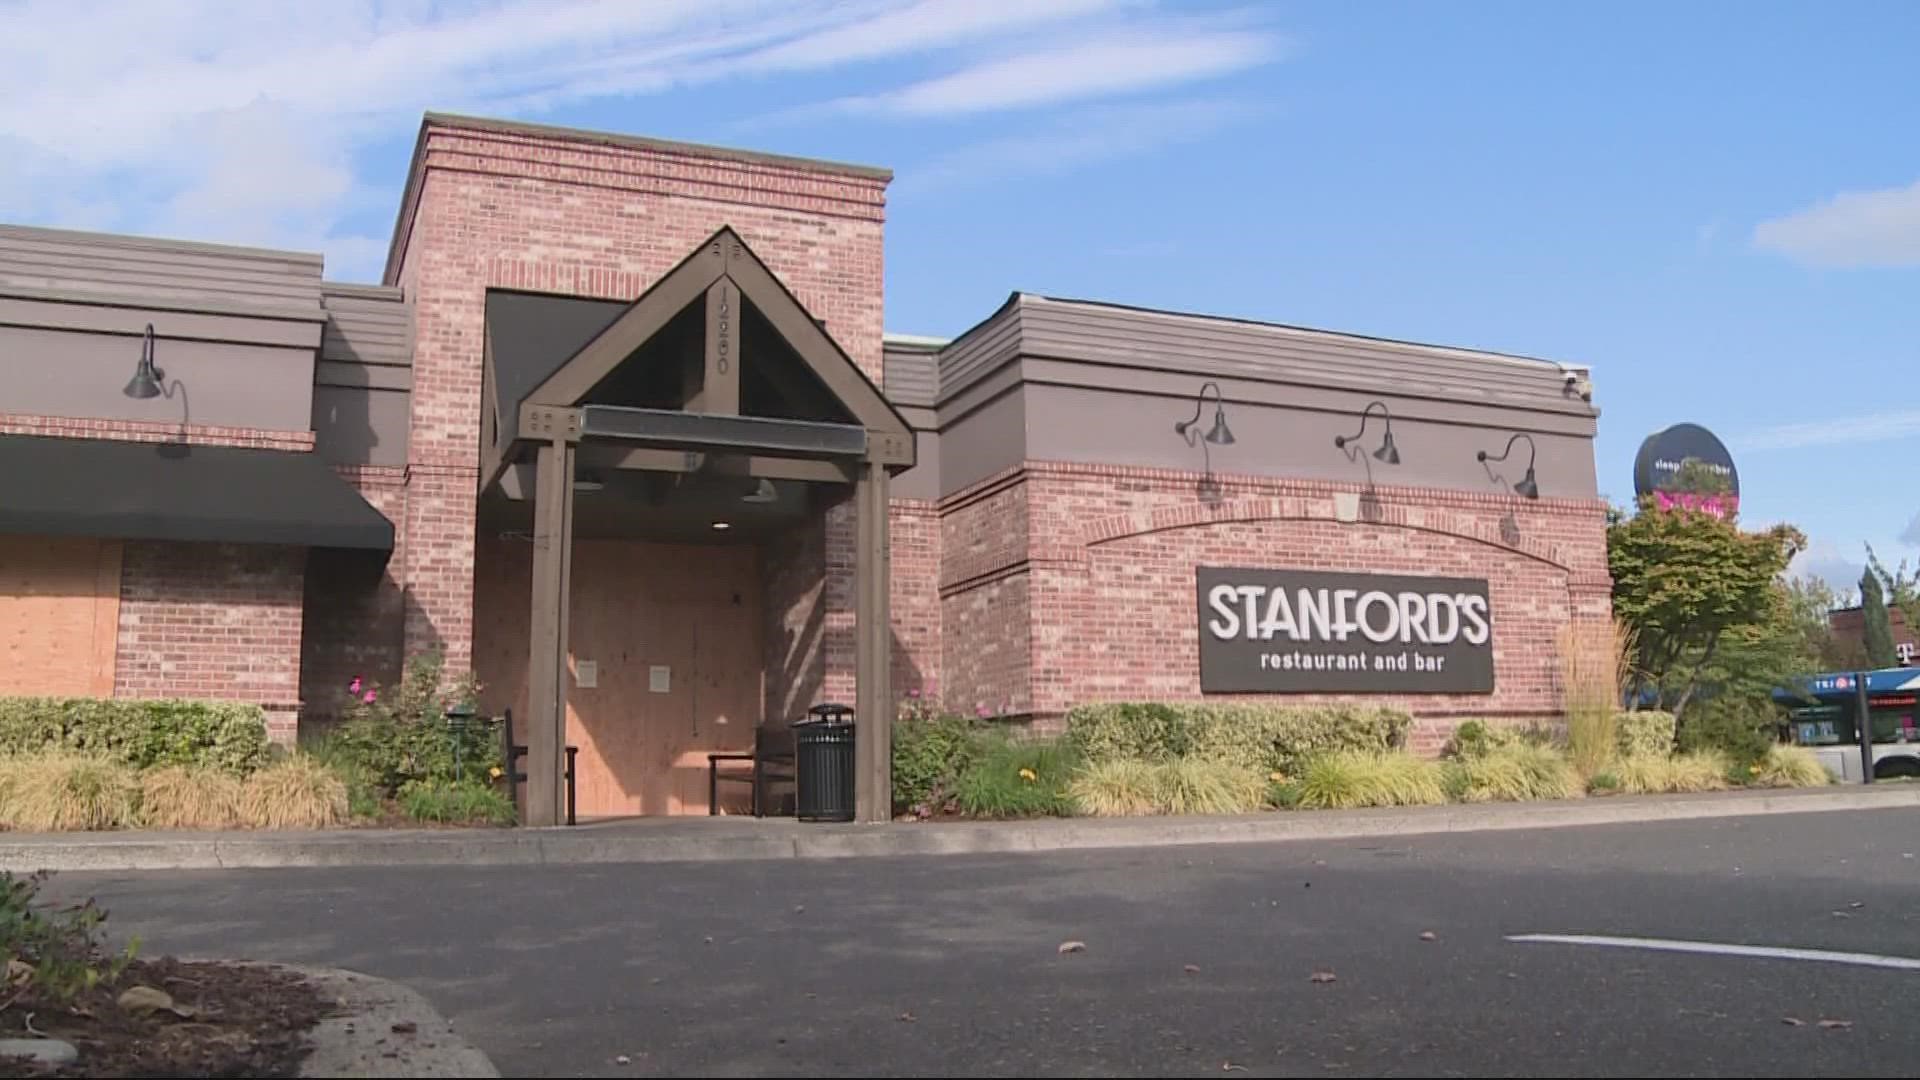 The temporary Stanford's closure comes about two months after the nearby Cracker Barrel shut its doors, reportedly due to similar safety and security concerns.